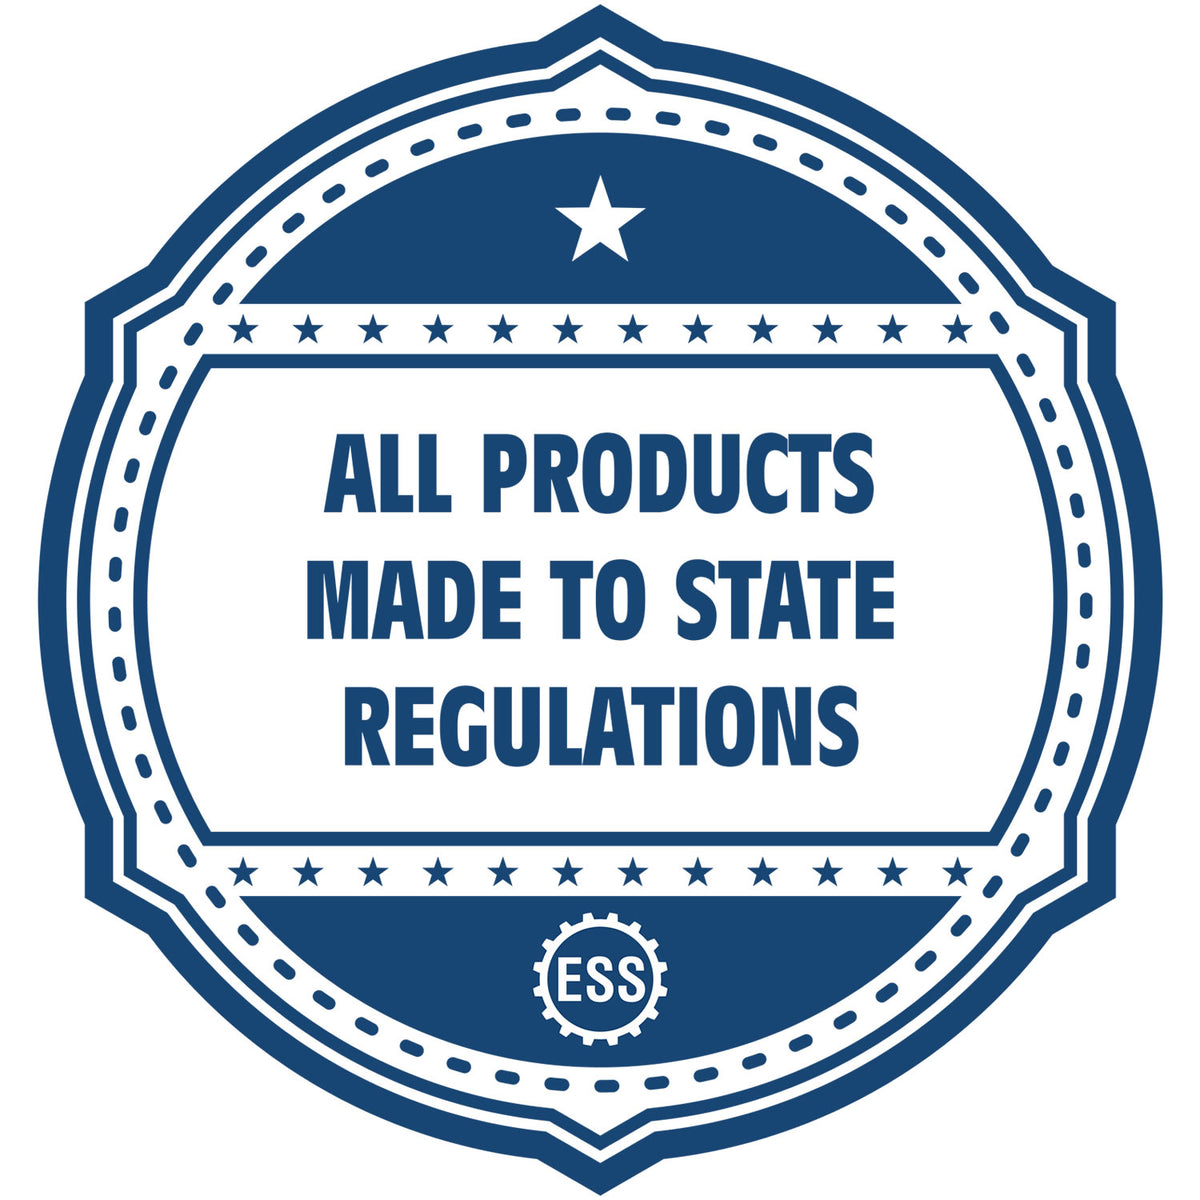 An icon or badge element for the Handheld Minnesota Architect Seal Embosser showing that this product is made in compliance with state regulations.